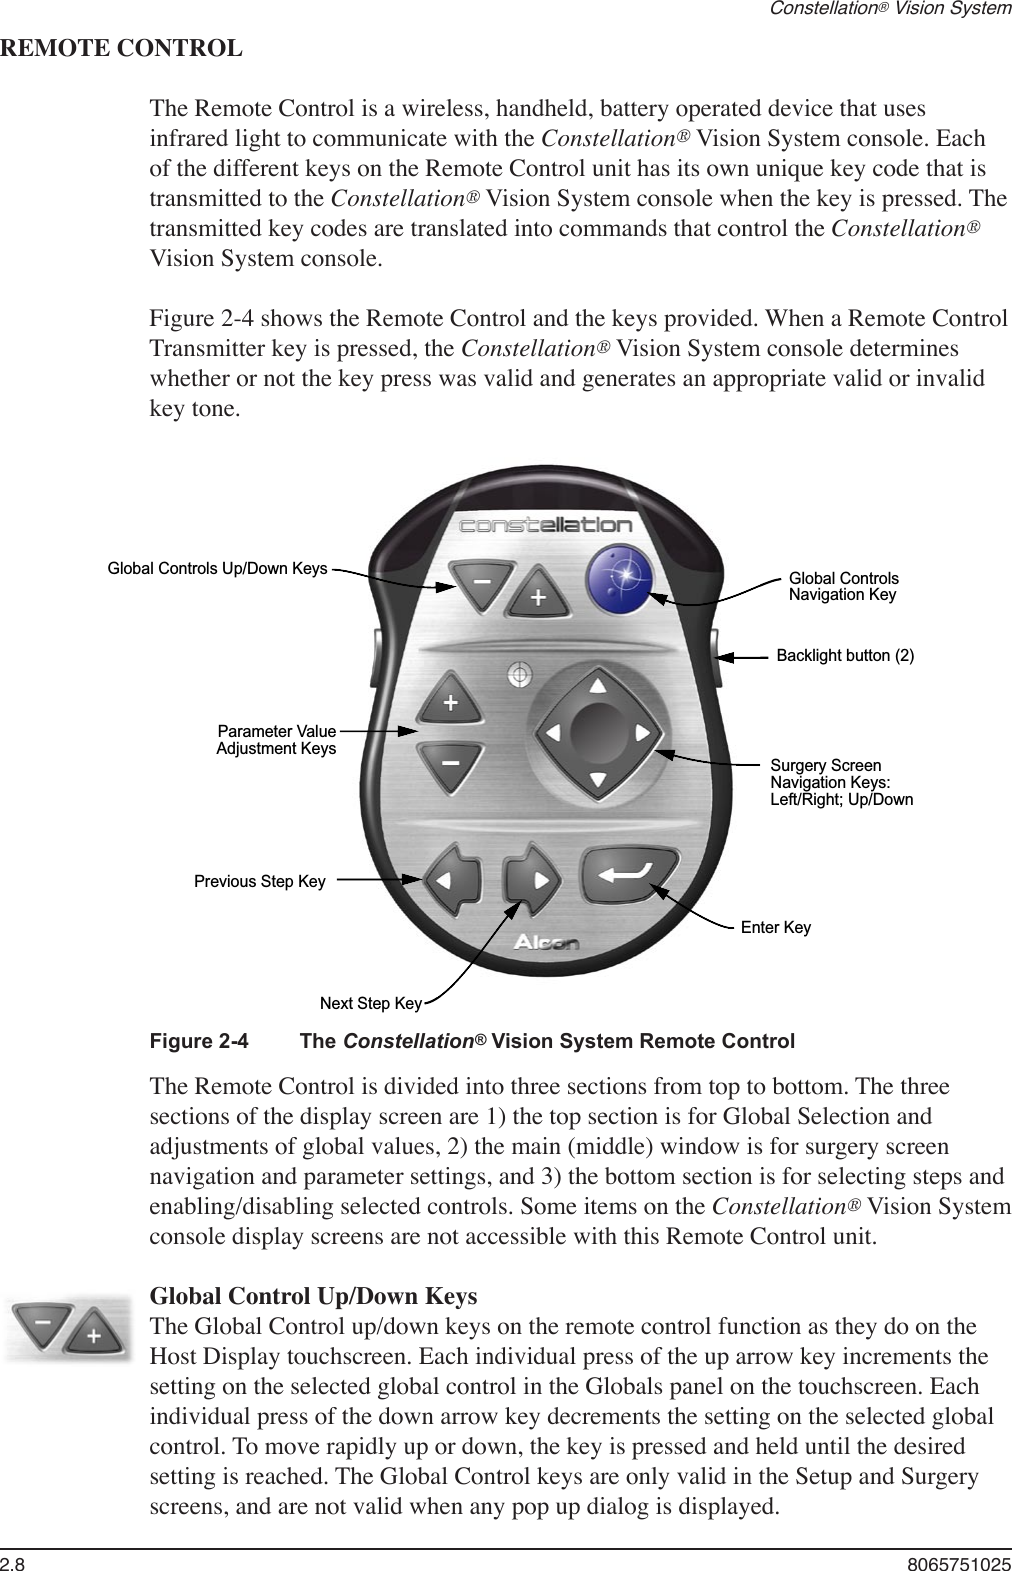 2.8  8065751025Constellation® Vision SystemREMOTE CONTROLThe Remote Control is a wireless, handheld, battery operated device that uses infrared light to communicate with the Constellation® Vision System console. Each of the different keys on the Remote Control unit has its own unique key code that is transmitted to the Constellation® Vision System console when the key is pressed. The transmitted key codes are translated into commands that control the Constellation® Vision System console.Figure 2-4 shows the Remote Control and the keys provided. When a Remote Control Transmitter key is pressed, the Constellation® Vision System console determines whether or not the key press was valid and generates an appropriate valid or invalid key tone. Global Controls Up/Down KeysNext Step KeyParameter ValueAdjustment KeysGlobal ControlsNavigation KeyBacklight button (2)Enter KeySurgery ScreenNavigation Keys:Left/Right; Up/DownPrevious Step KeyFigure 2-4  The Constellation® Vision System Remote ControlThe Remote Control is divided into three sections from top to bottom. The three sections of the display screen are 1) the top section is for Global Selection and adjustments of global values, 2) the main (middle) window is for surgery screen navigation and parameter settings, and 3) the bottom section is for selecting steps and enabling/disabling selected controls. Some items on the Constellation® Vision System console display screens are not accessible with this Remote Control unit.   Global Control Up/Down Keys  The Global Control up/down keys on the remote control function as they do on the Host Display touchscreen. Each individual press of the up arrow key increments the setting on the selected global control in the Globals panel on the touchscreen. Each individual press of the down arrow key decrements the setting on the selected global control. To move rapidly up or down, the key is pressed and held until the desired setting is reached. The Global Control keys are only valid in the Setup and Surgery screens, and are not valid when any pop up dialog is displayed.